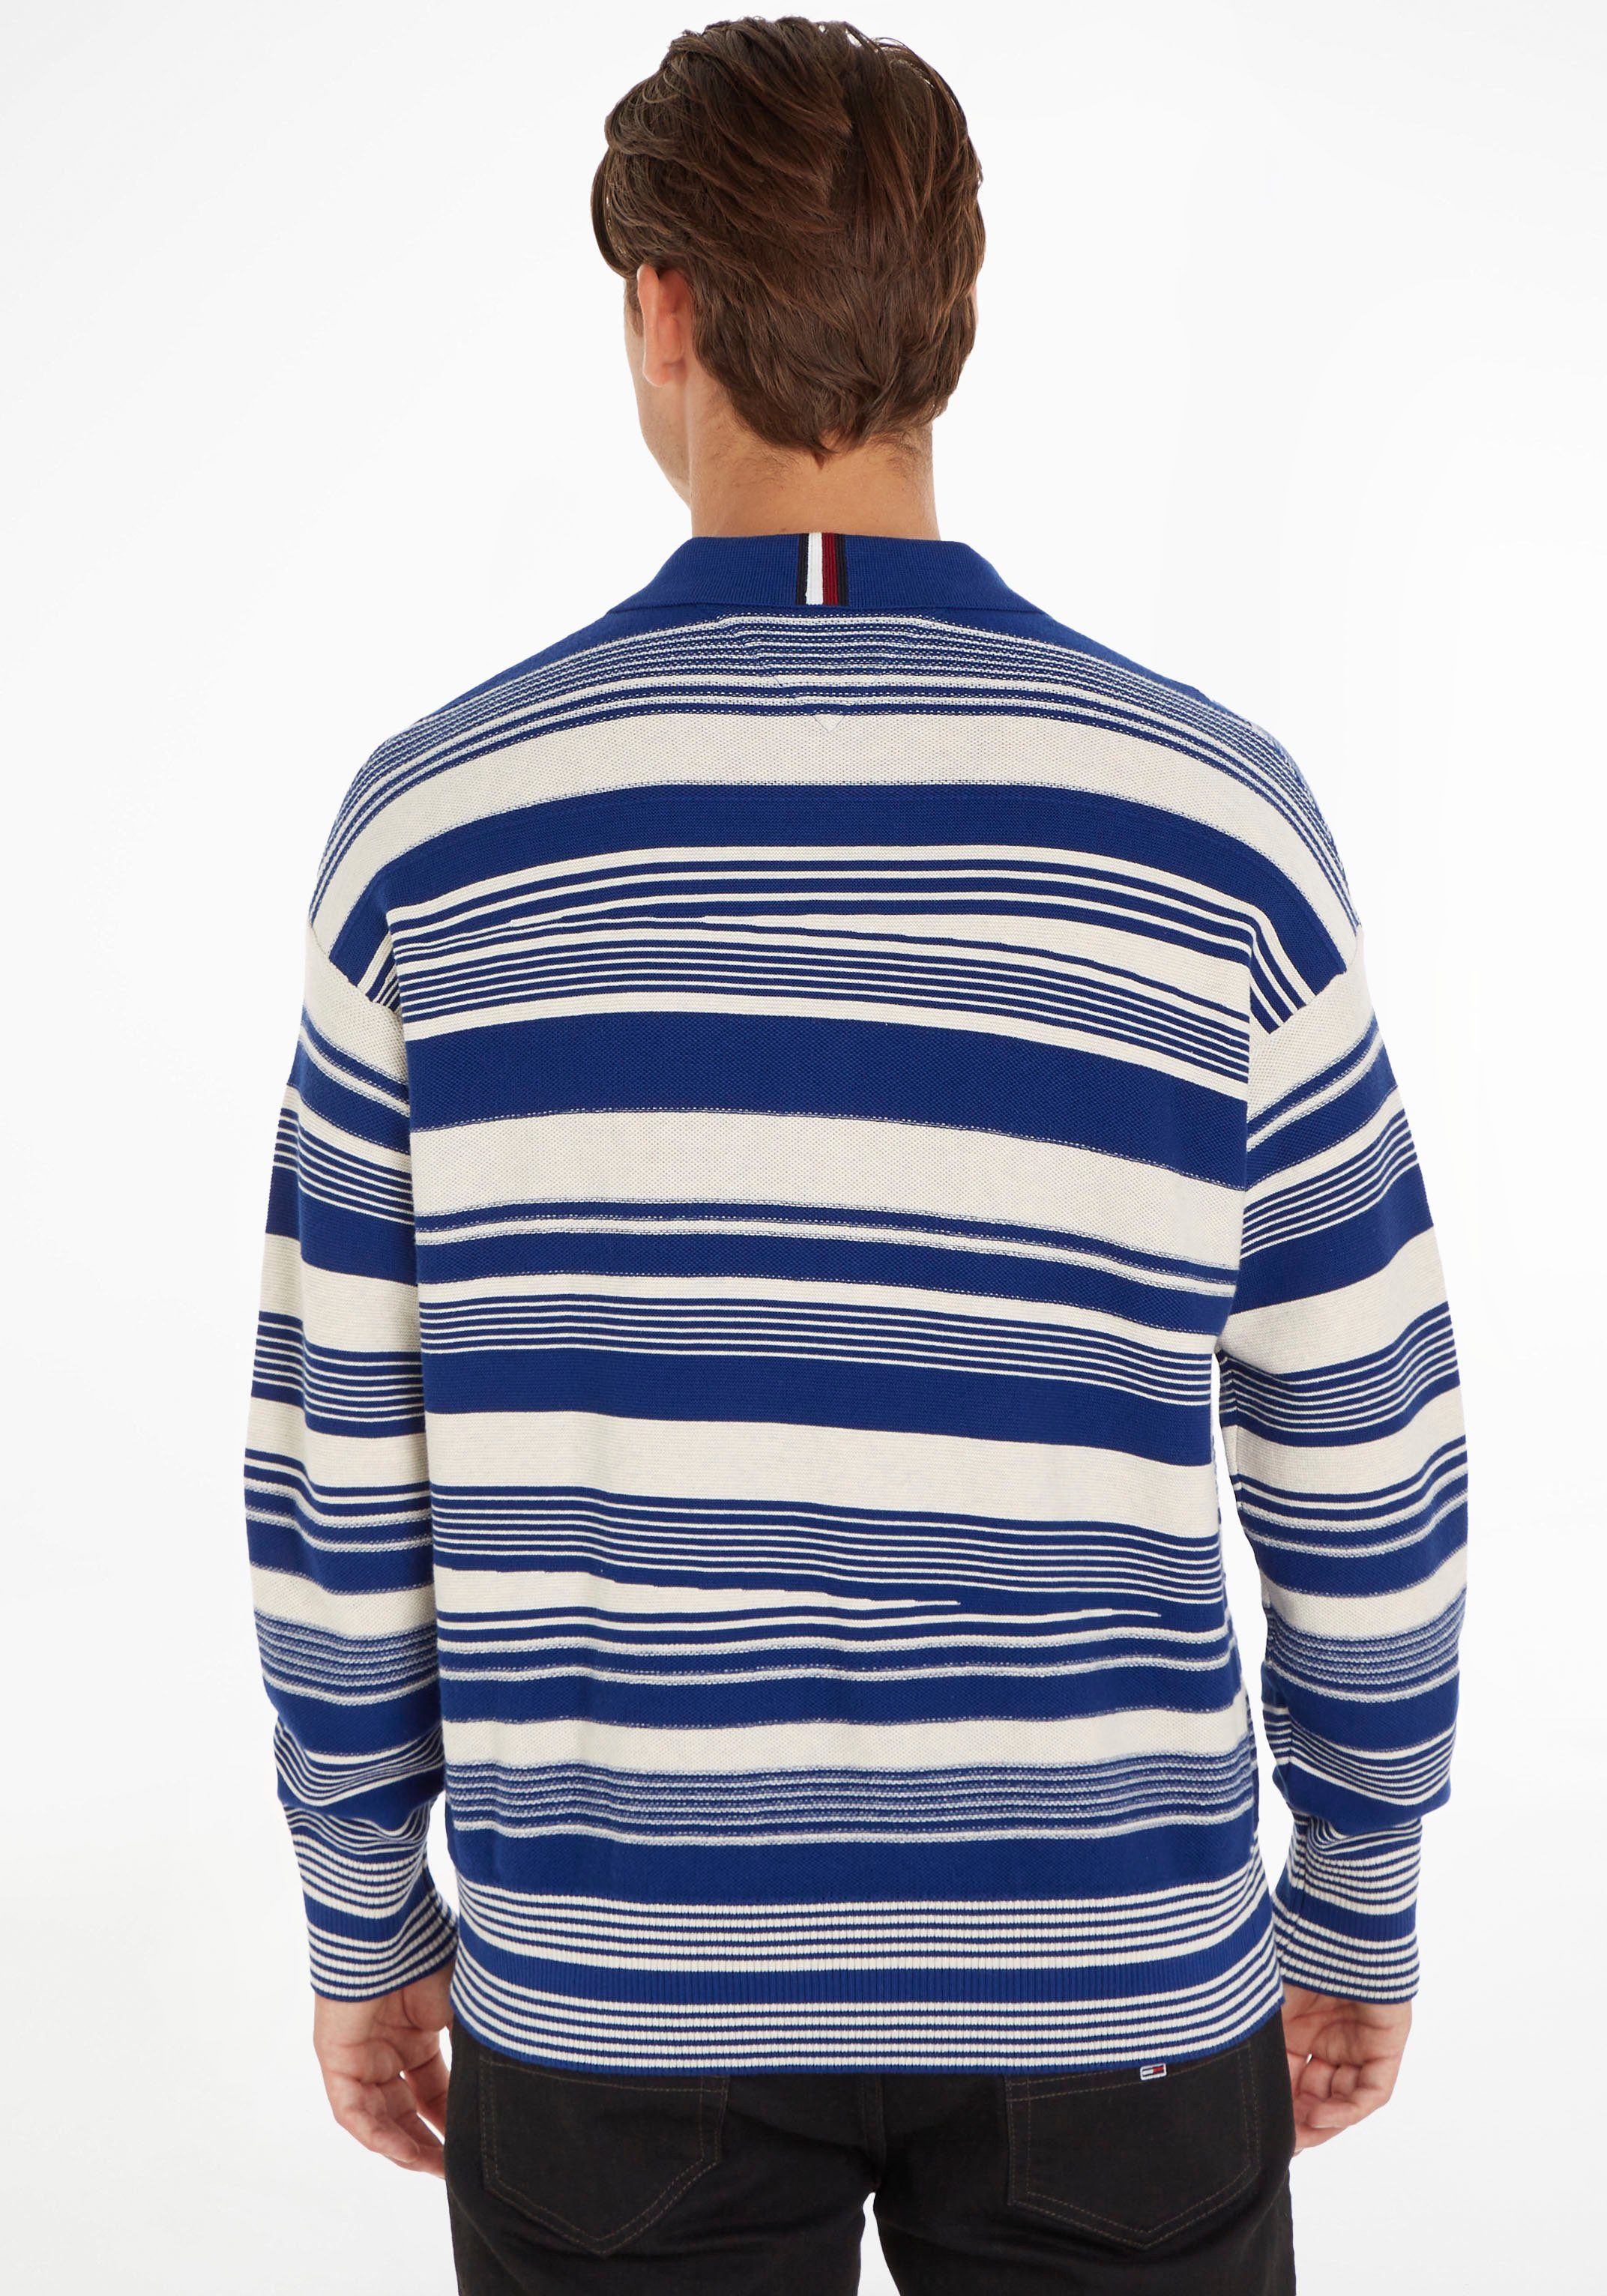 Tommy Hilfiger STRIPE CRAFTED Polokragenpullover POLO LS